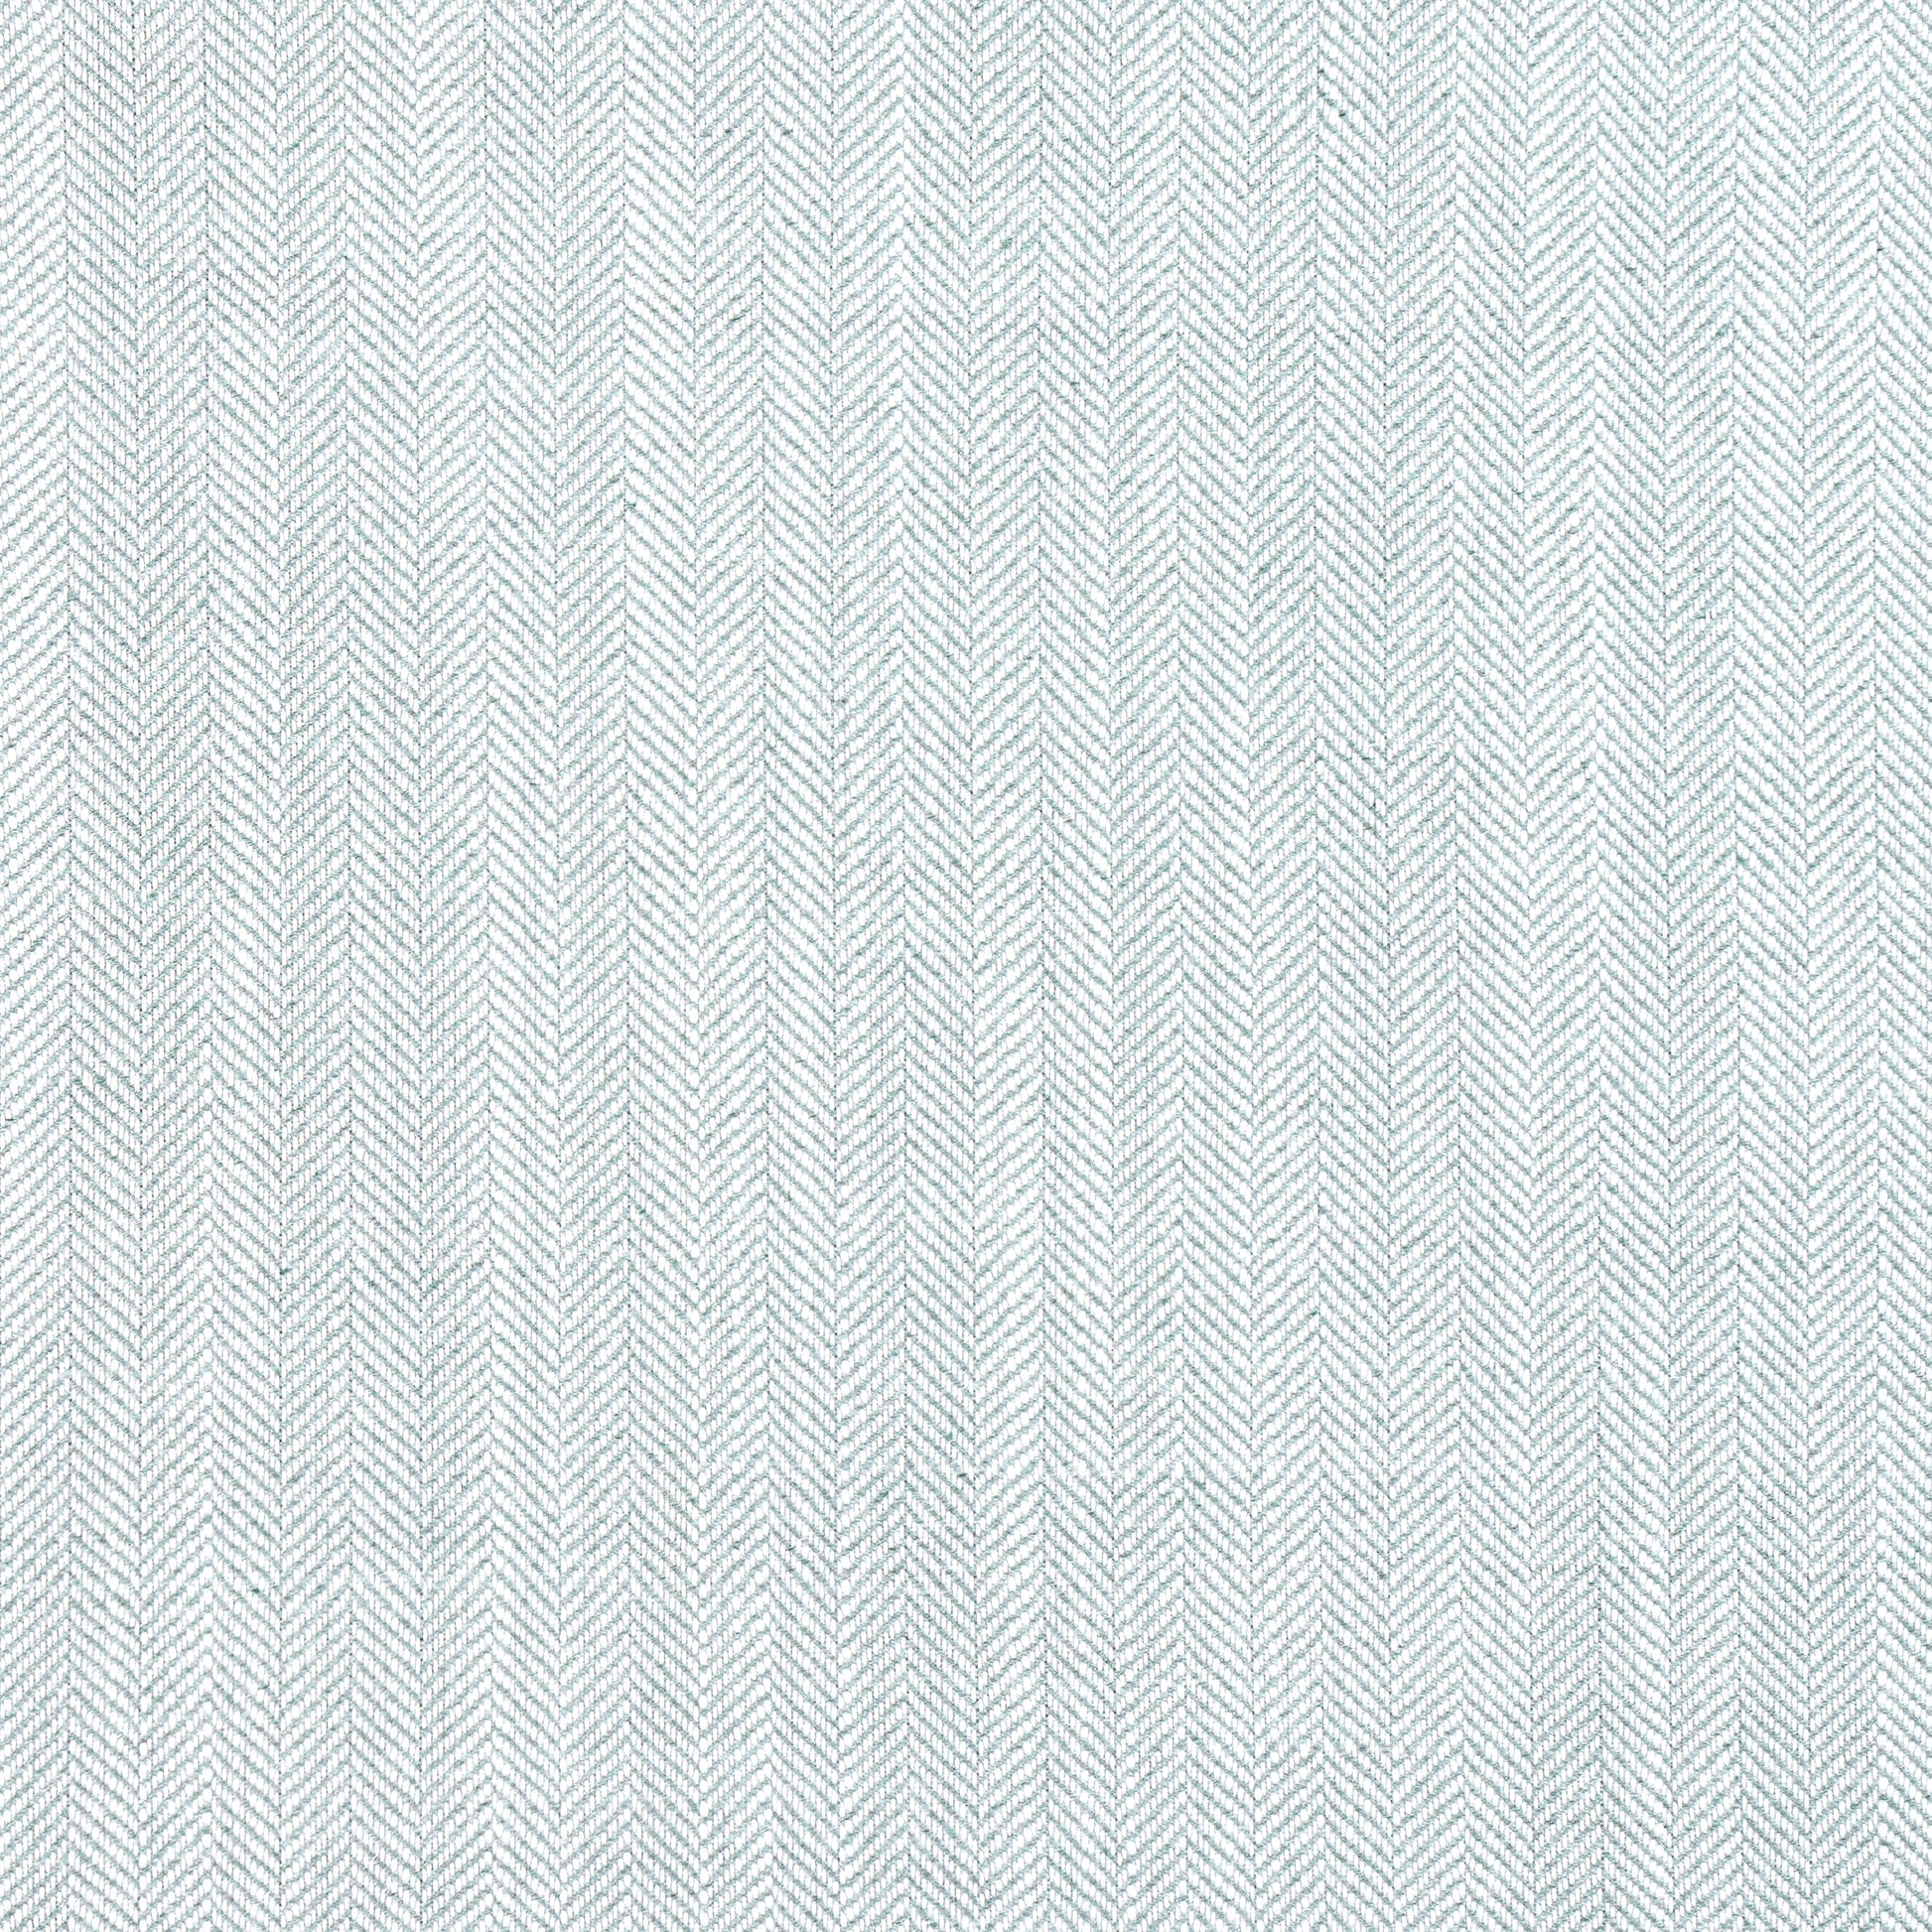 Purchase Thibaut Fabric Product W8565 pattern name Savile color Seafoam